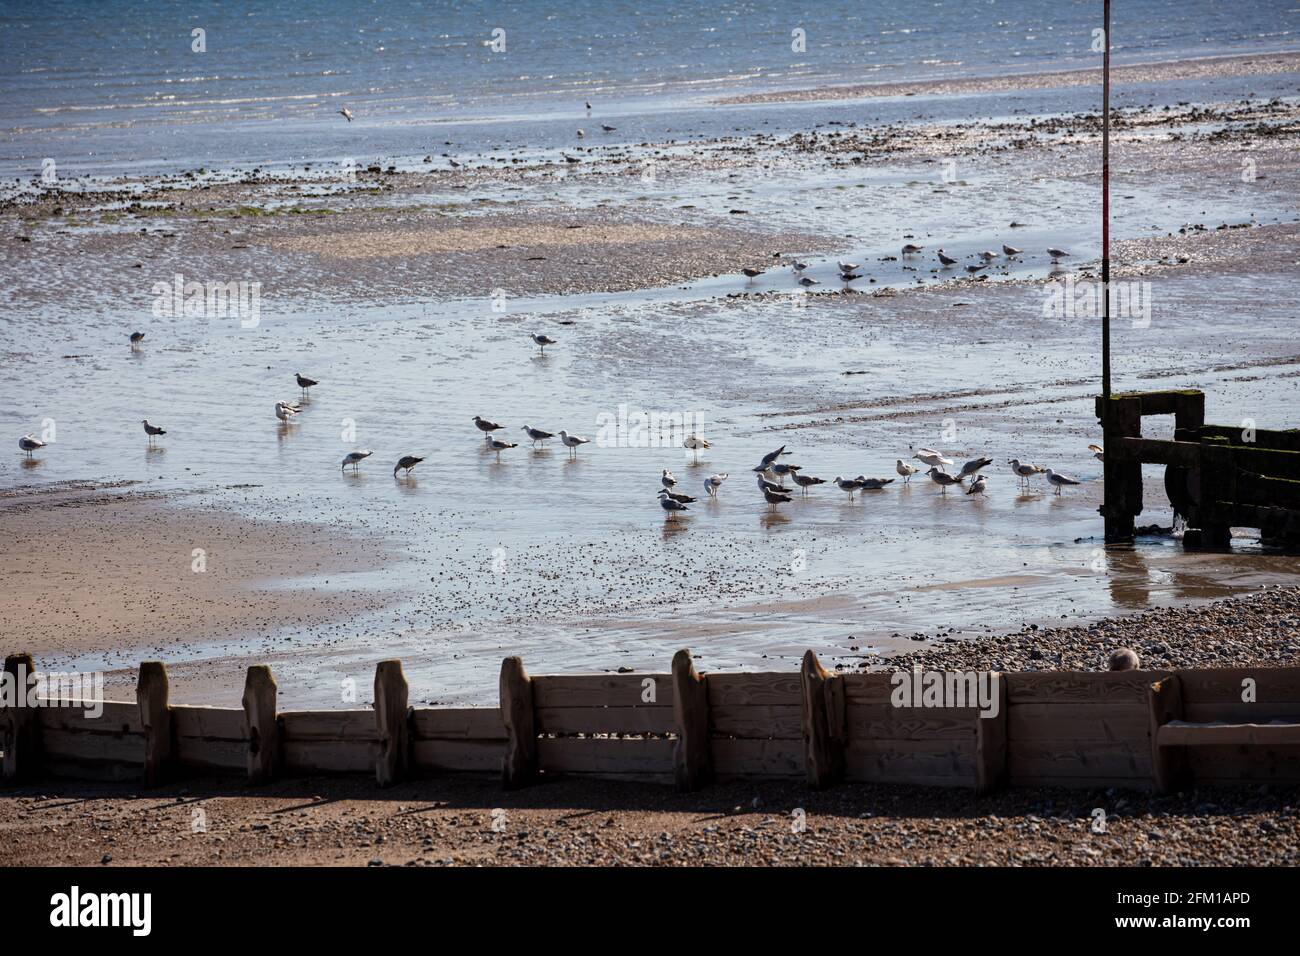 Herring Gulls, Red List conservation birds, drinking water from a rain water discharge pipe on Worthing beach. Mature and juvenile birds are visible. Stock Photo